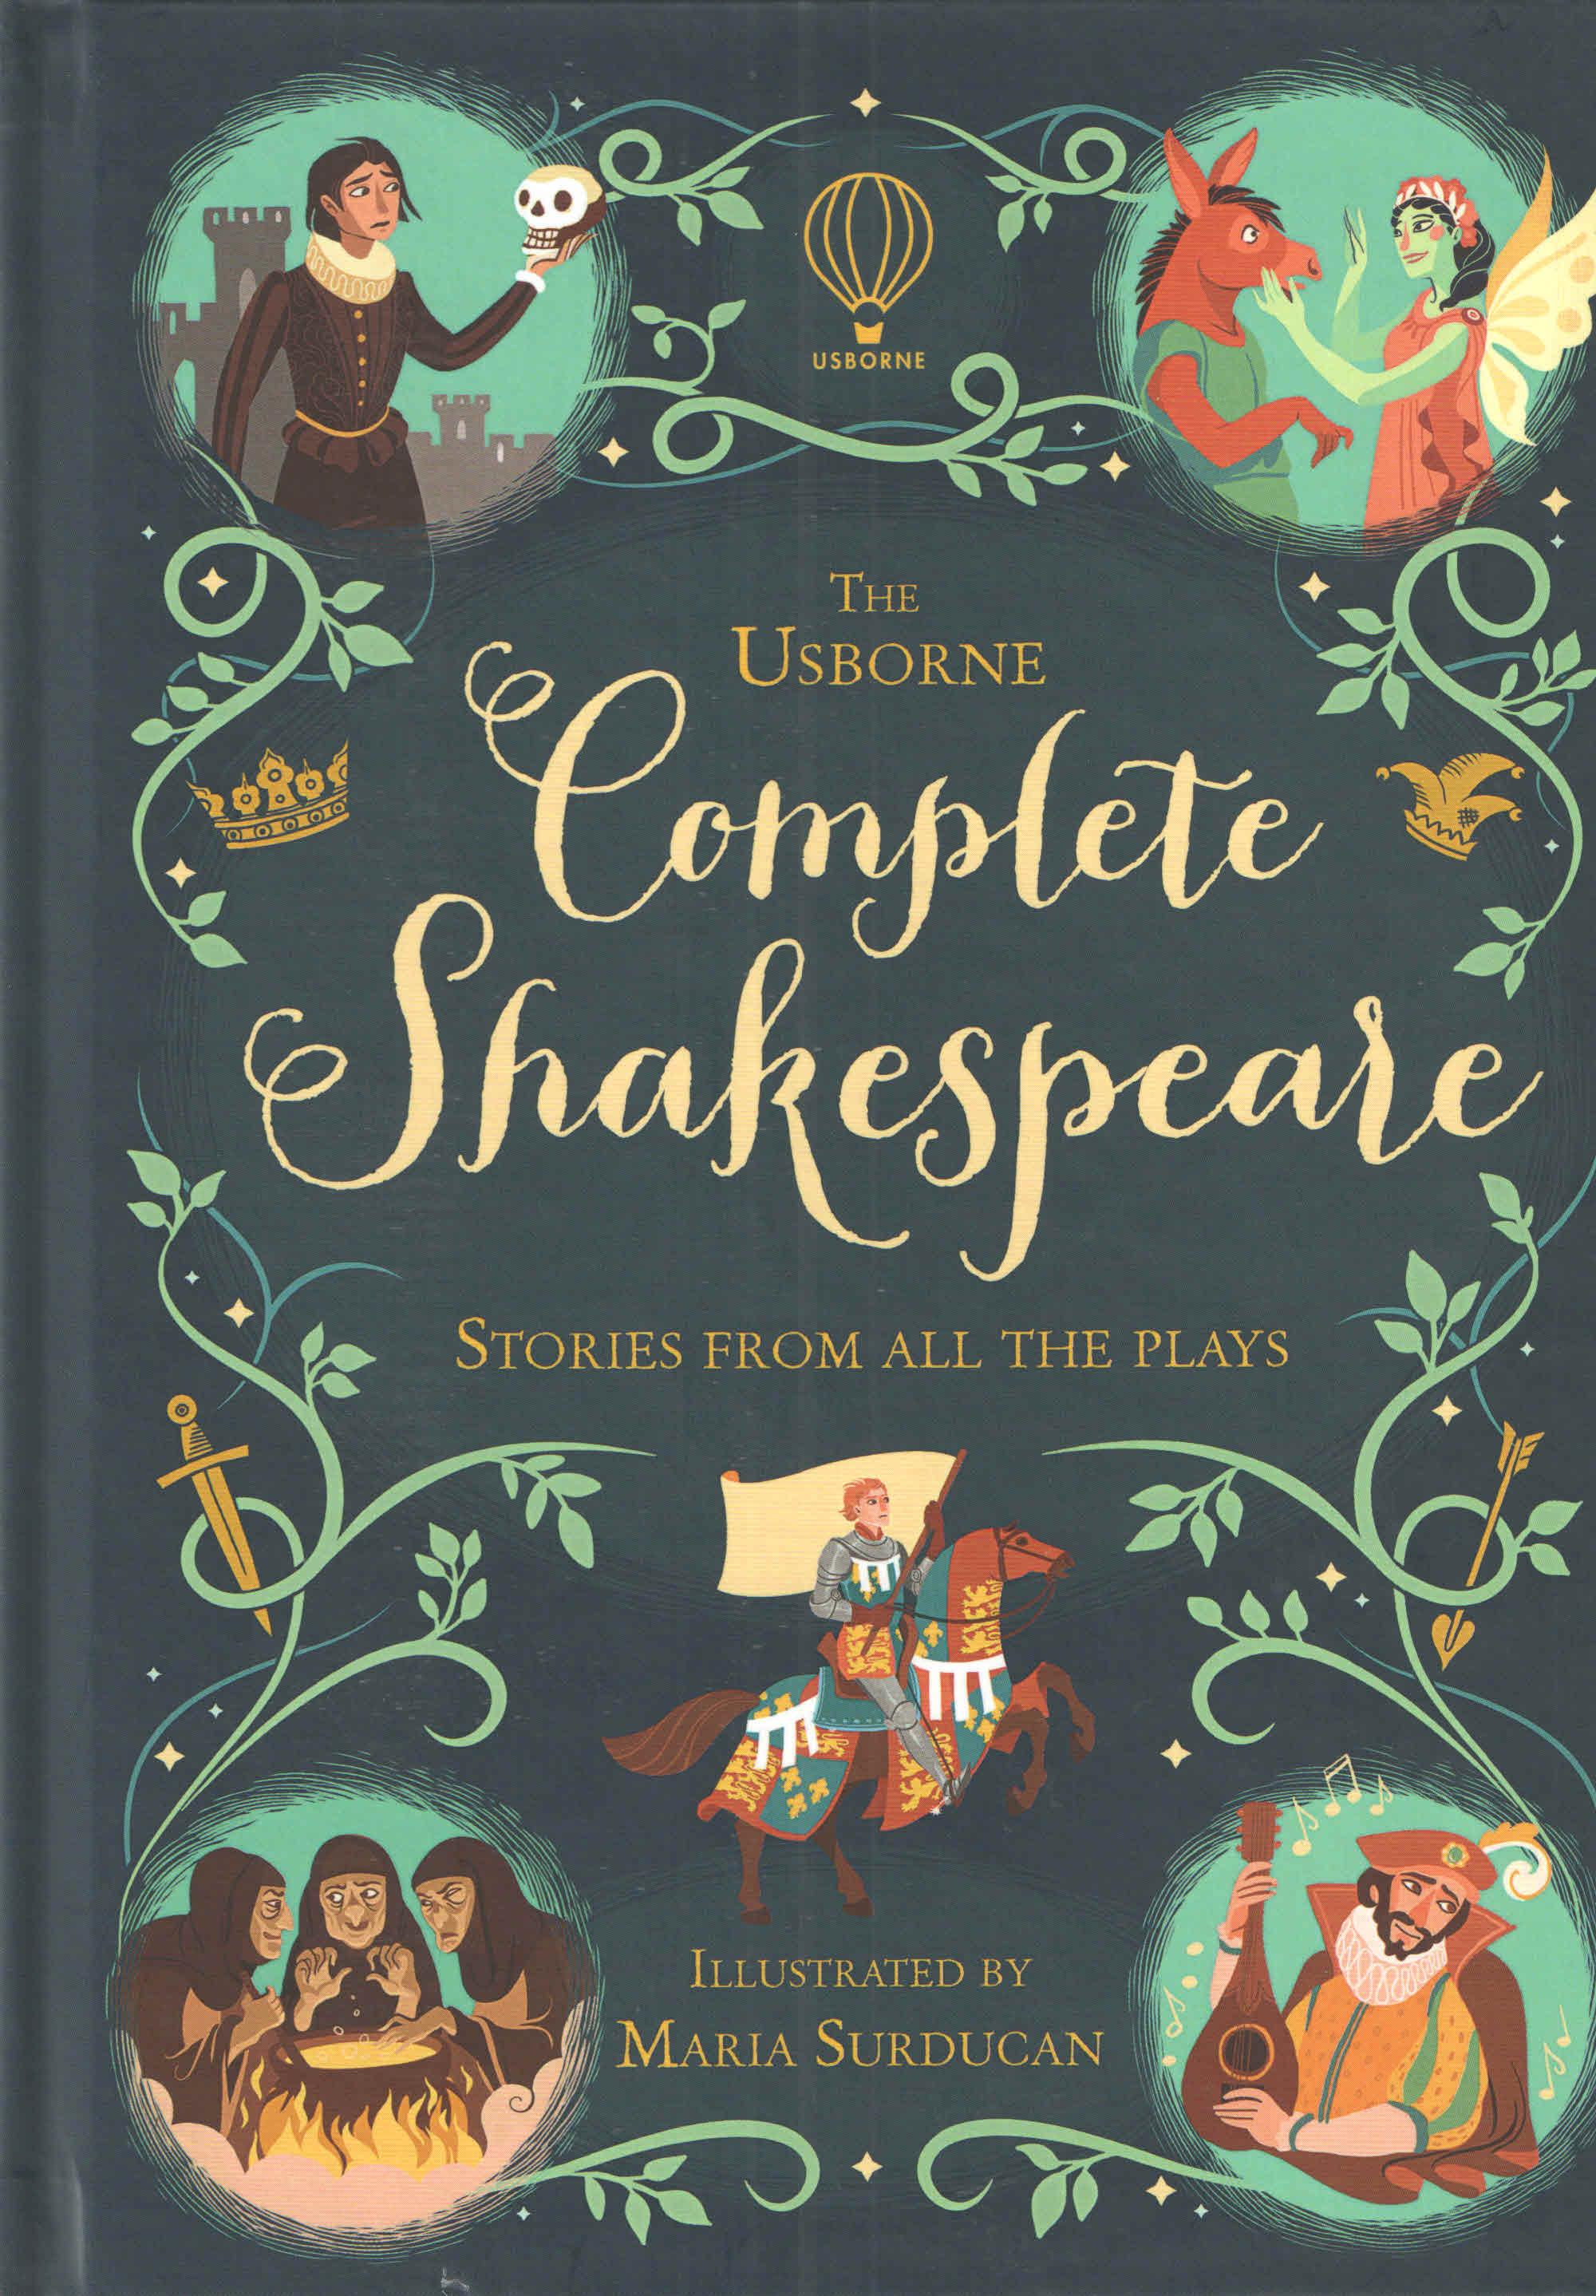 USBORNE COMPLETE SHAKESPEARE by DK TODAY